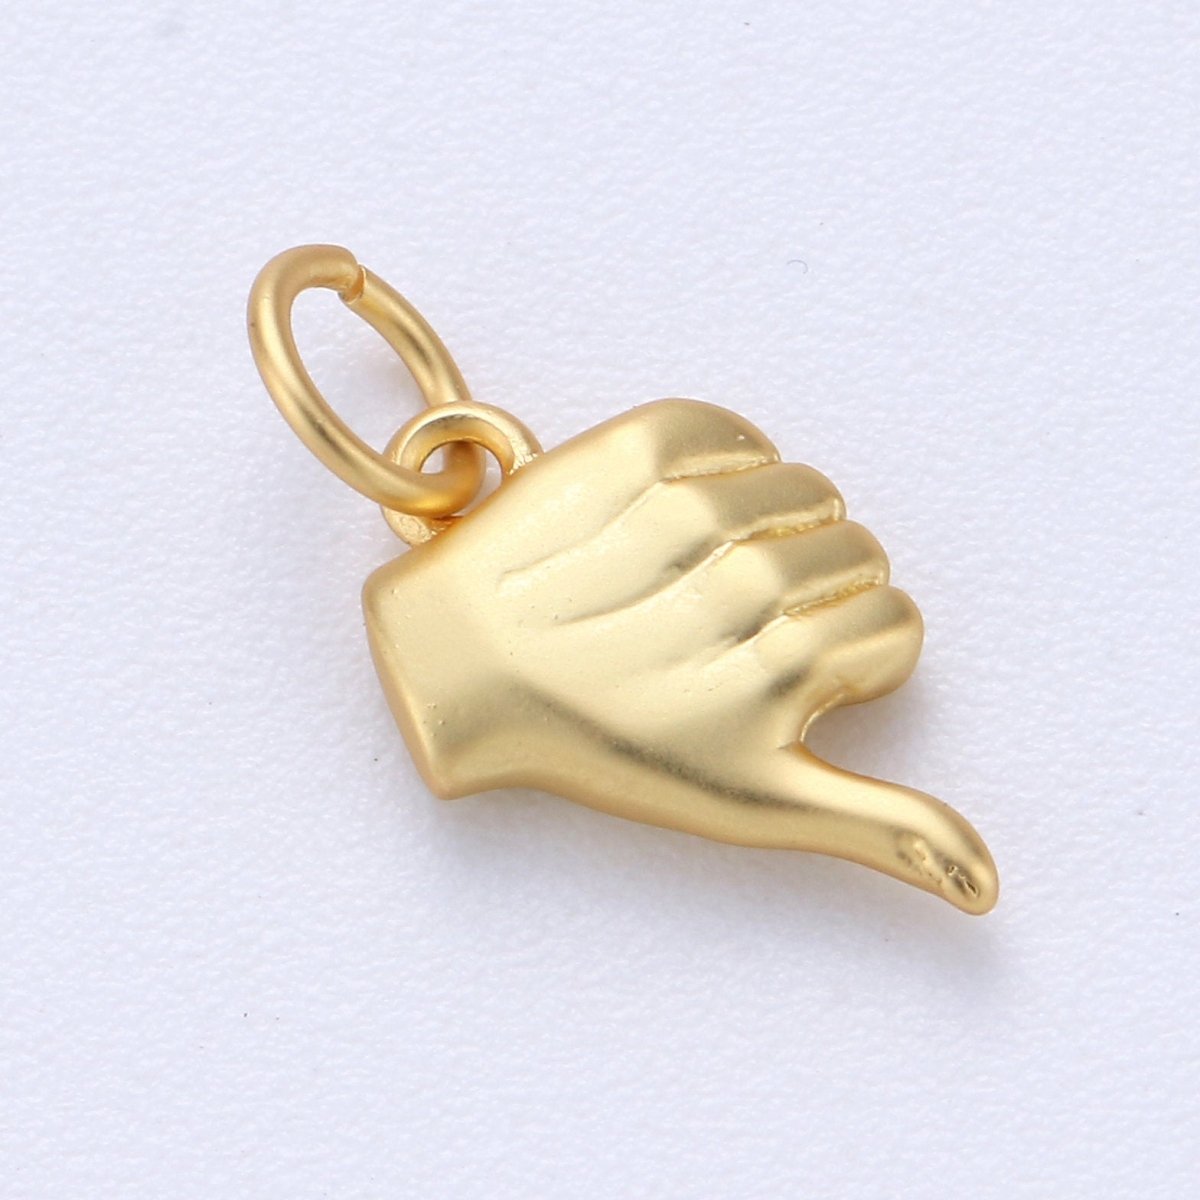 Dainty Thumbs up Charm hand Pendant in Gold Filled "Like" Emoji Charm, Jewelry Supplies, Jewelry Making Earring Bracelet Necklace Charm C-408 - DLUXCA